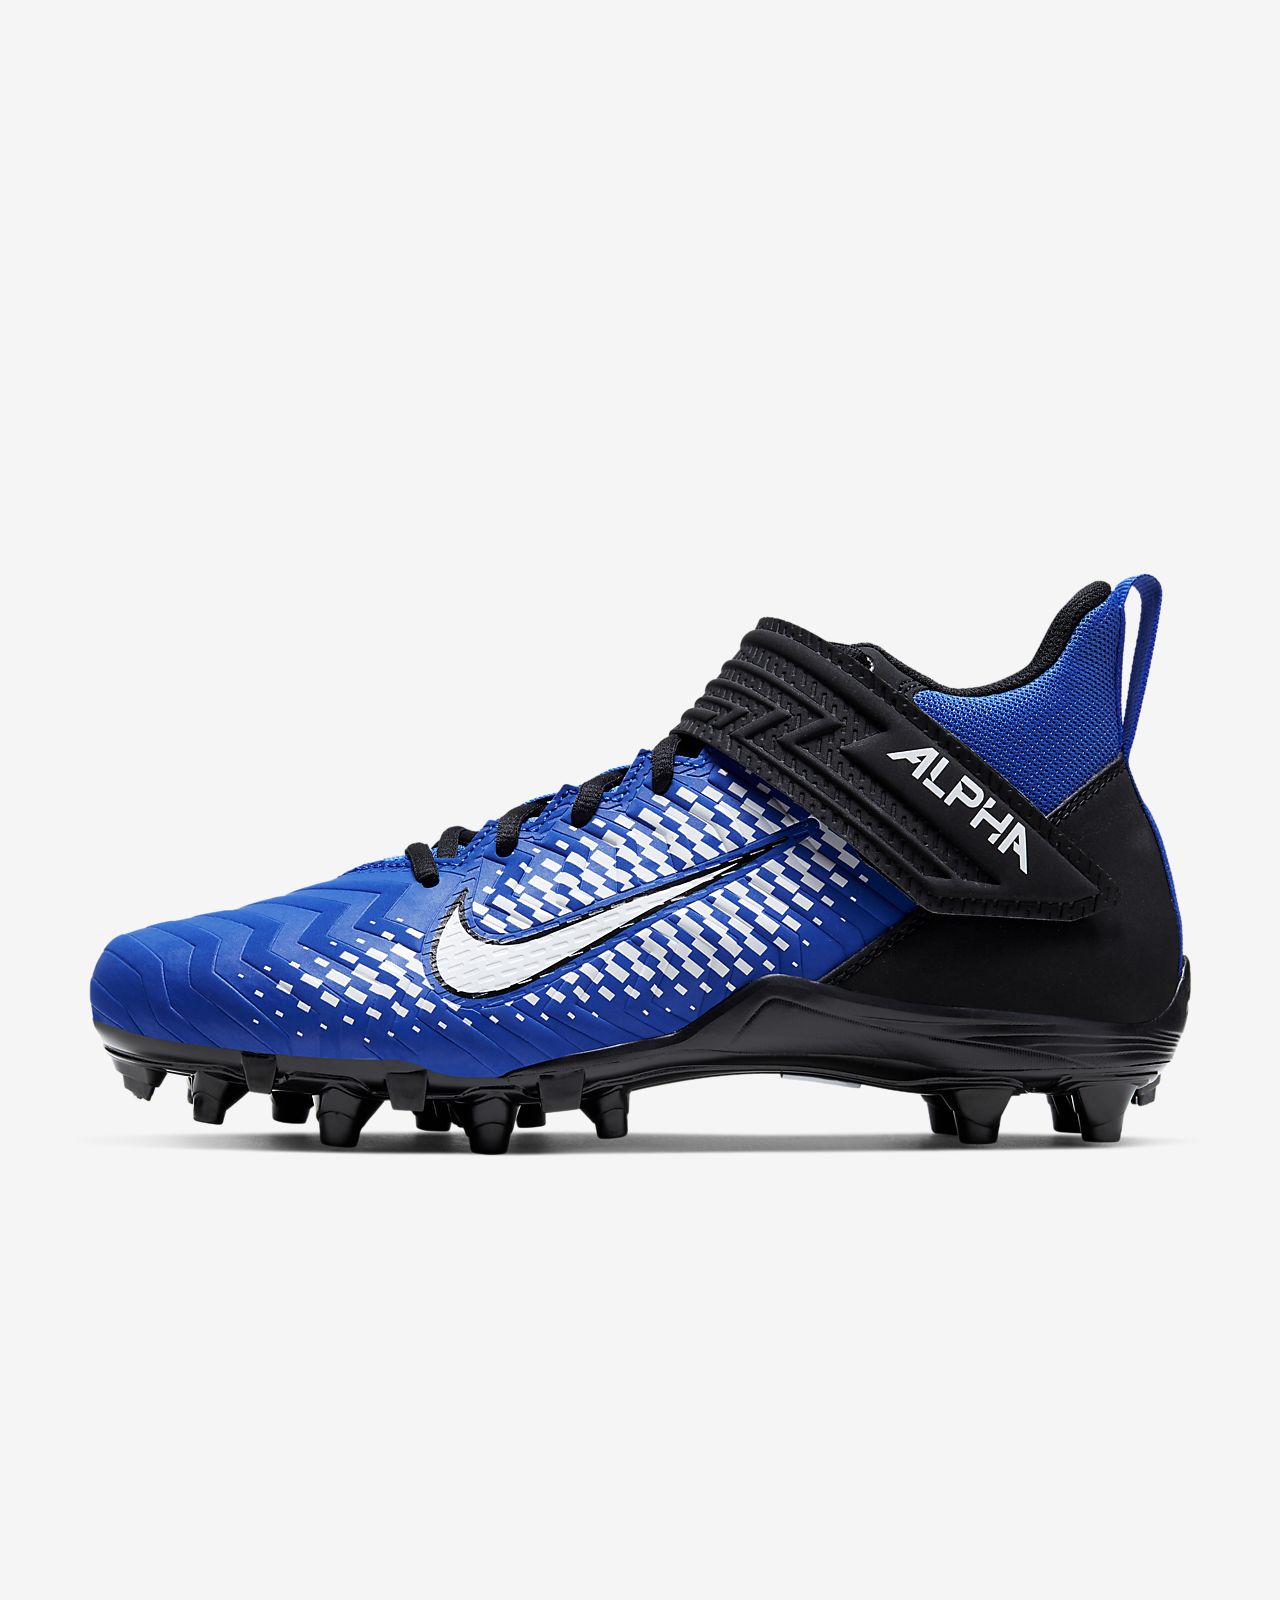 toddler soccer cleats 10c